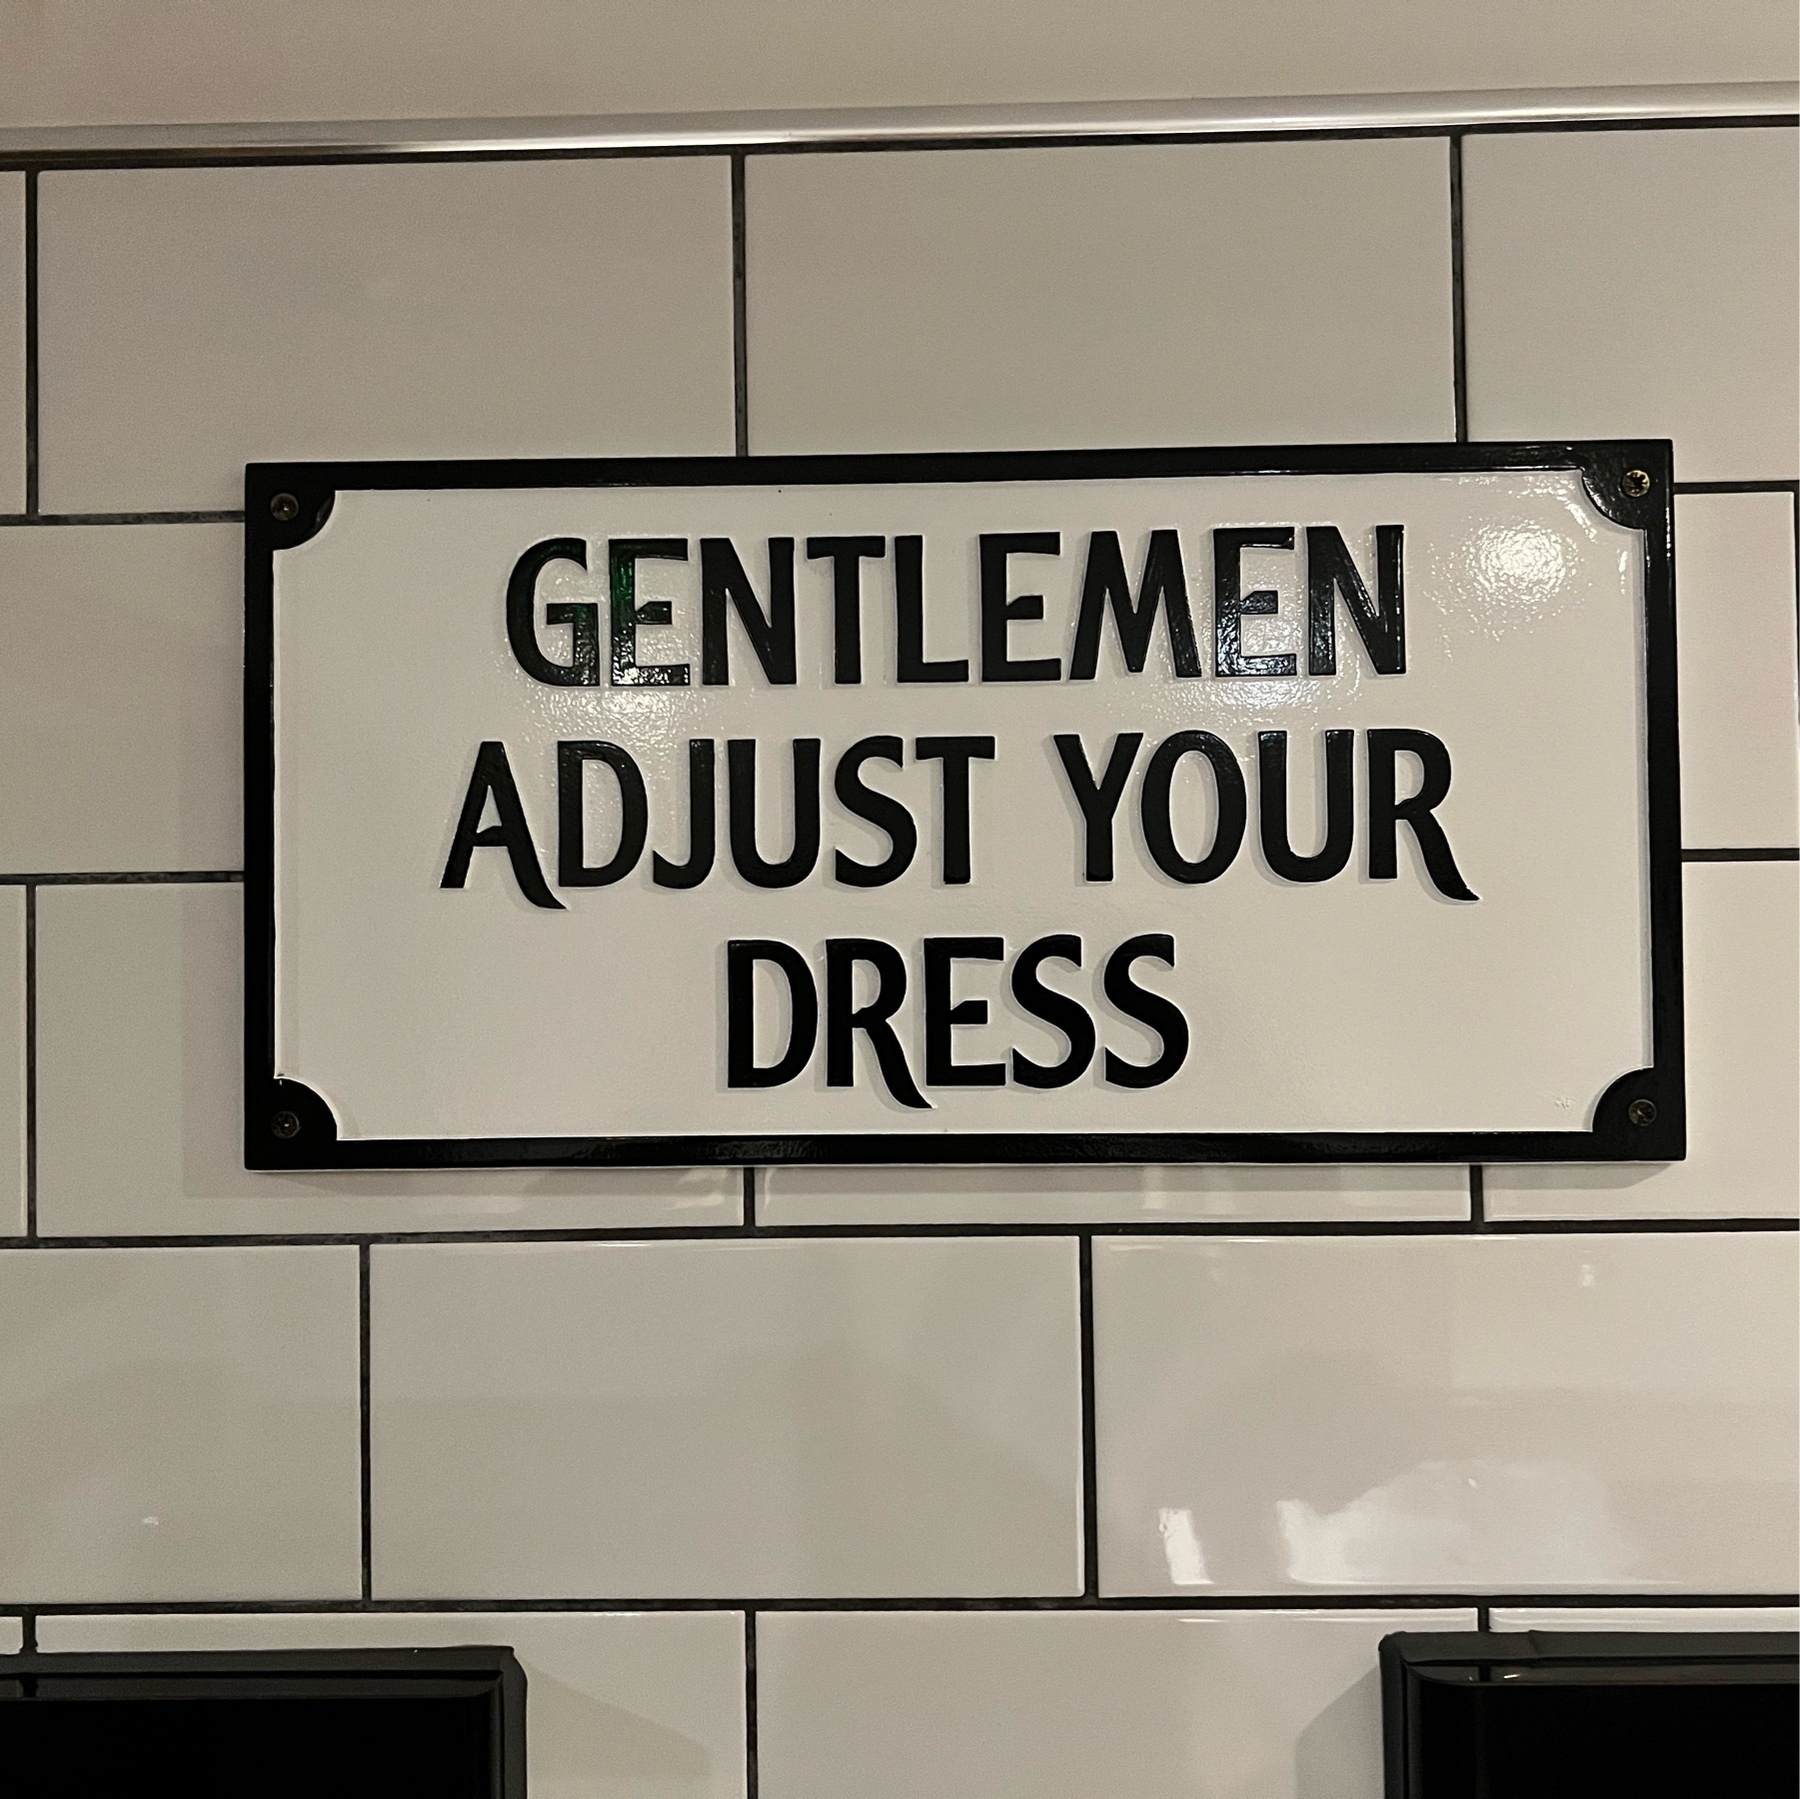 A sign in a pub toilet saying "Gentlemen adjust your dress". 